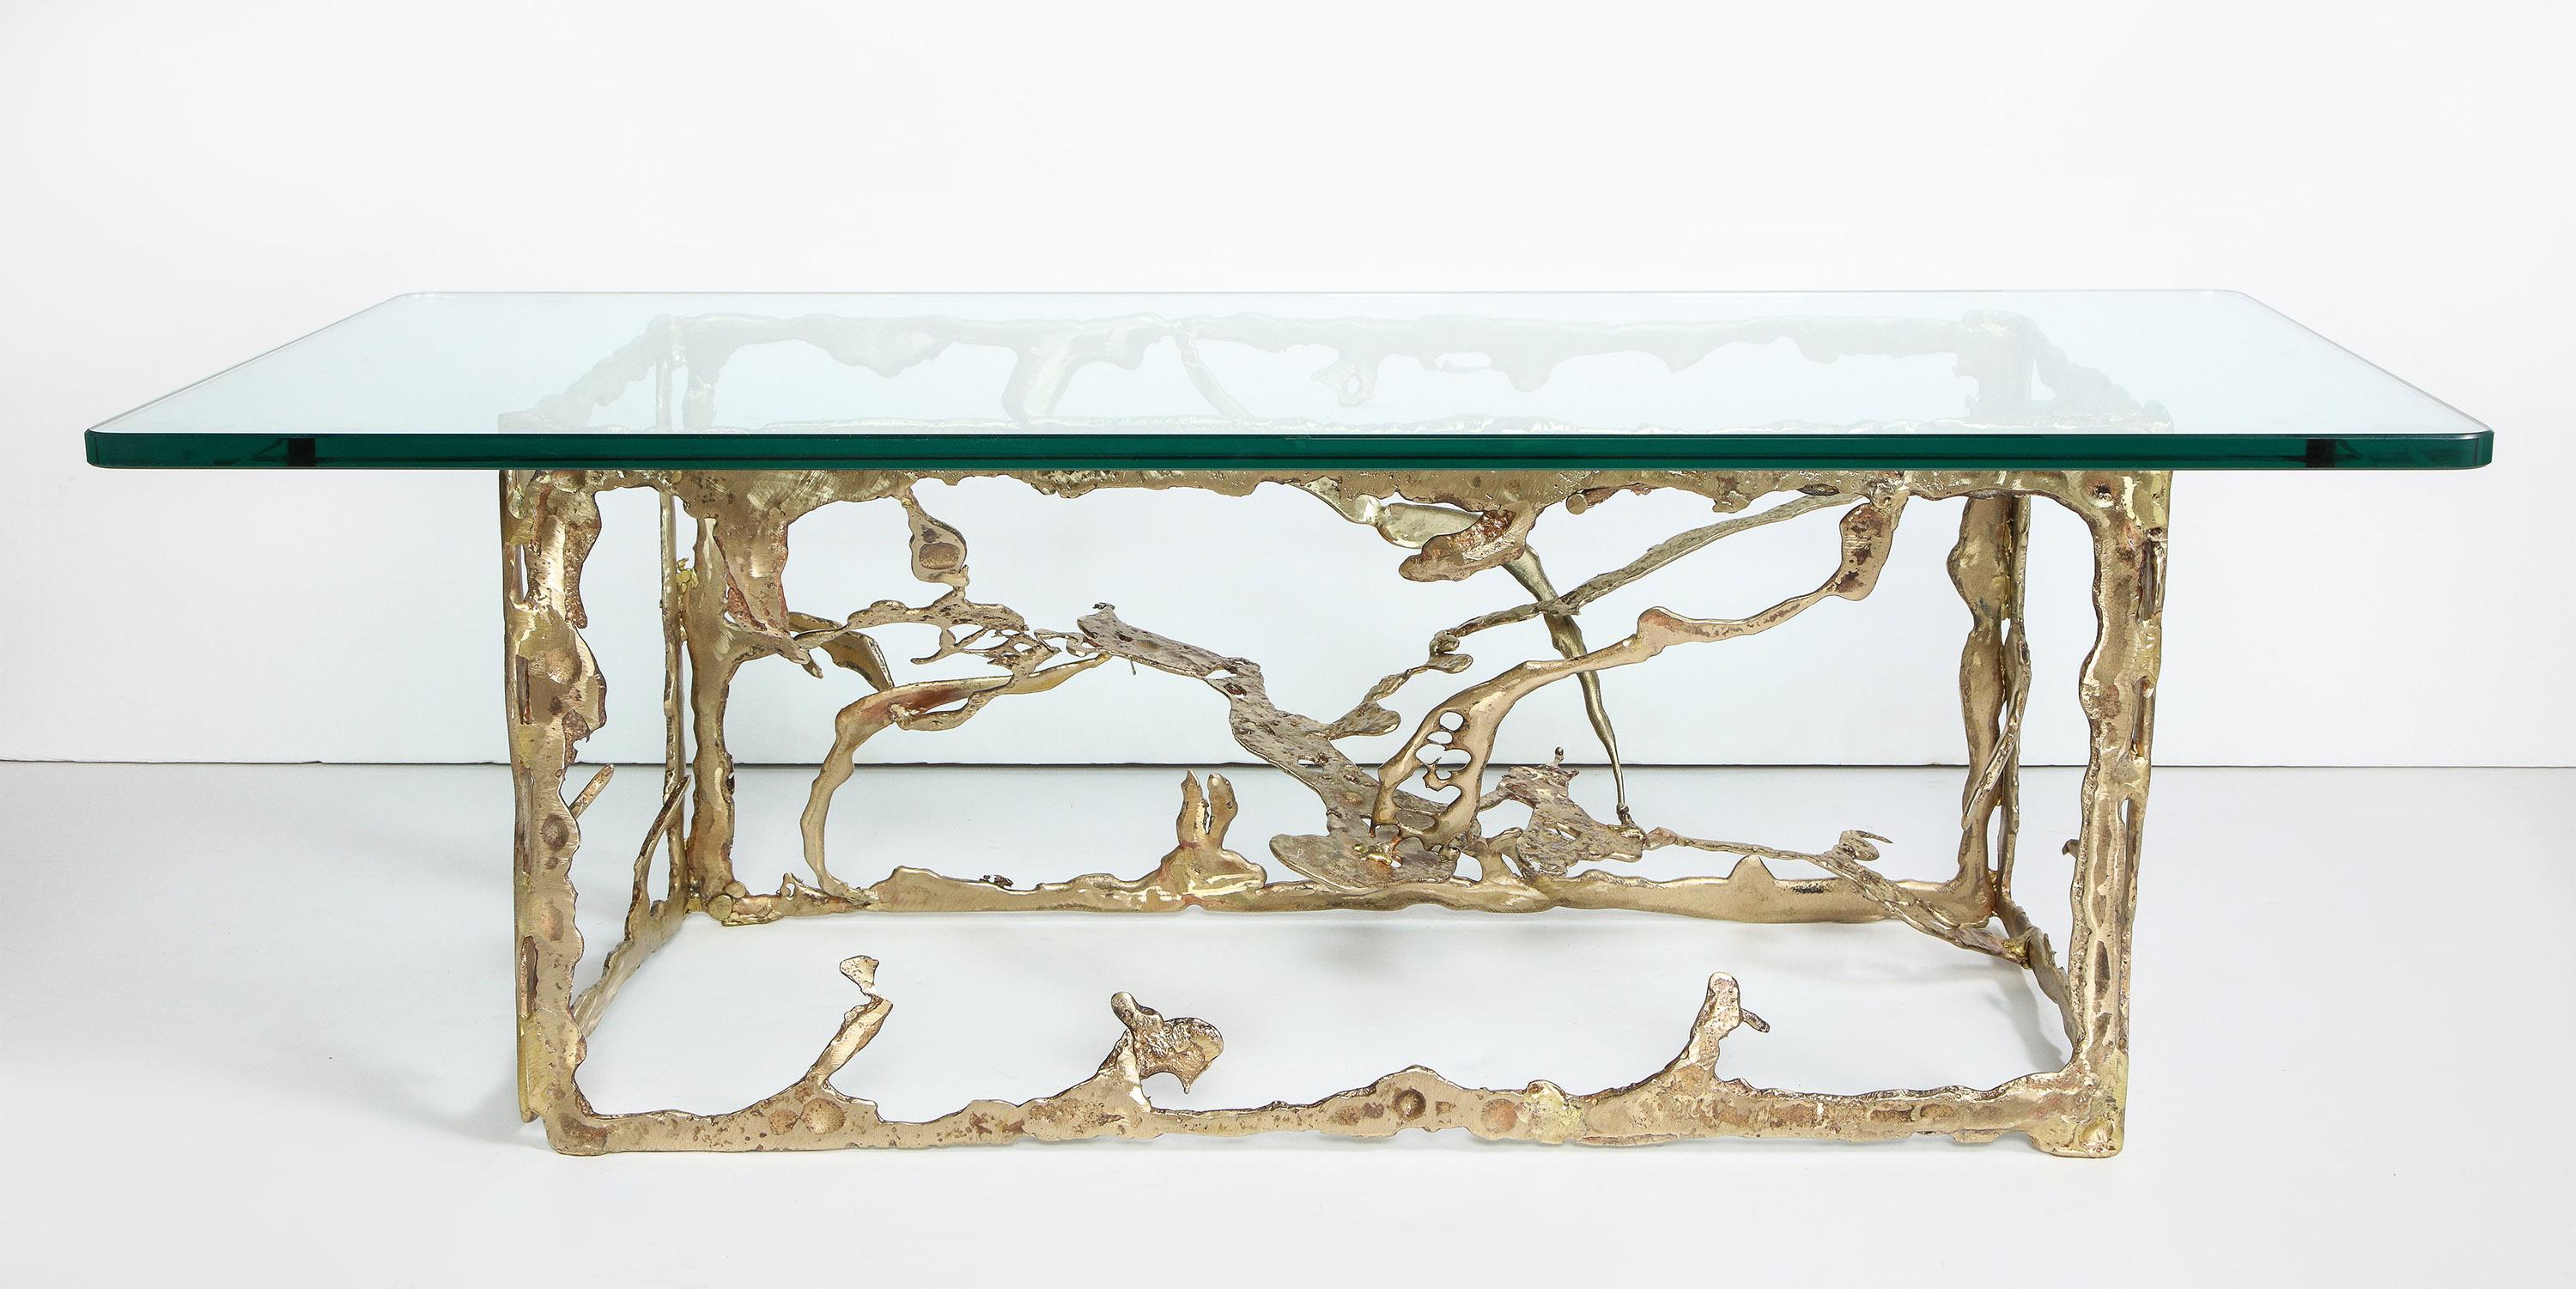 The rectangular freeform cast bronze base supporting a glass top.

Signed Silas Seandel.